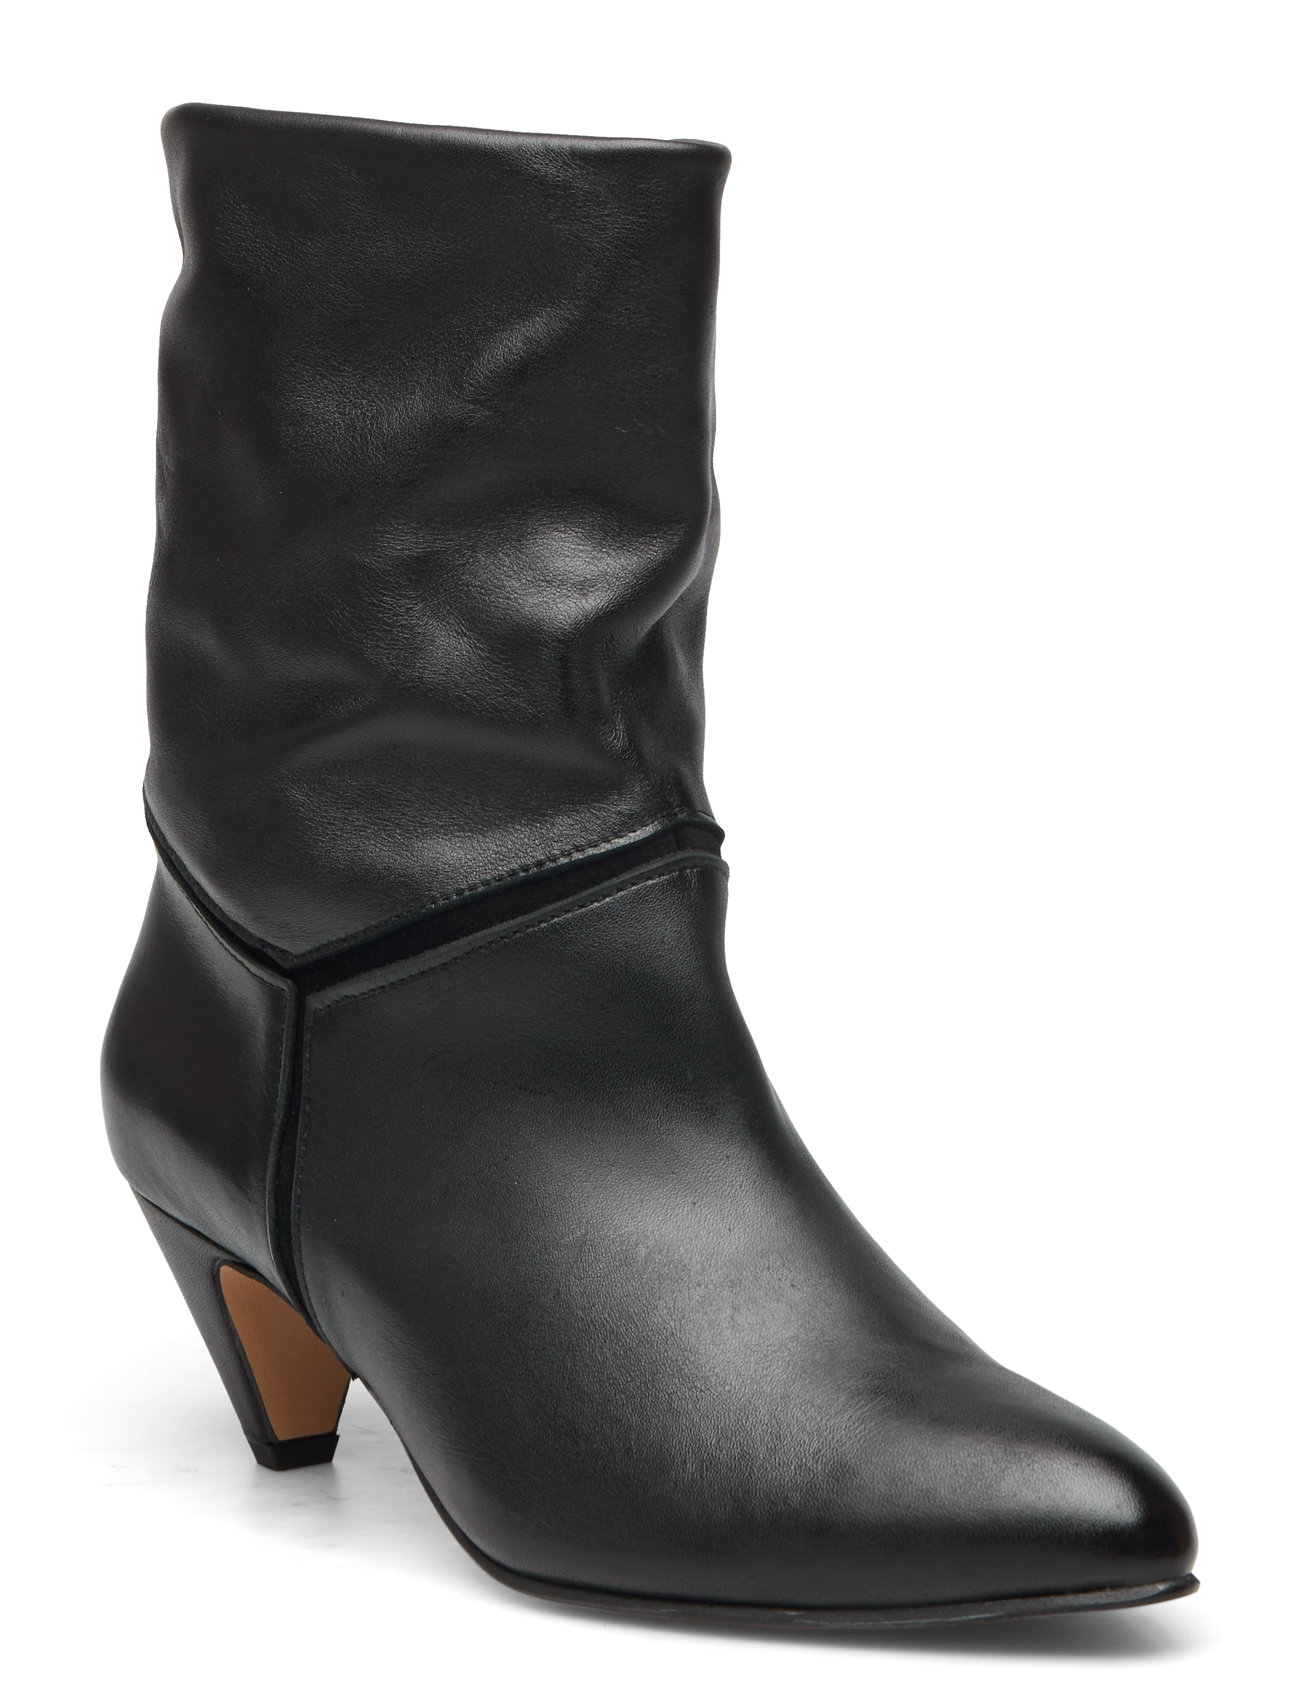 Jassi 50 Stiletto Shoes Boots Ankle Boots Ankle Boots With Heel Black Anonymous Copenhagen